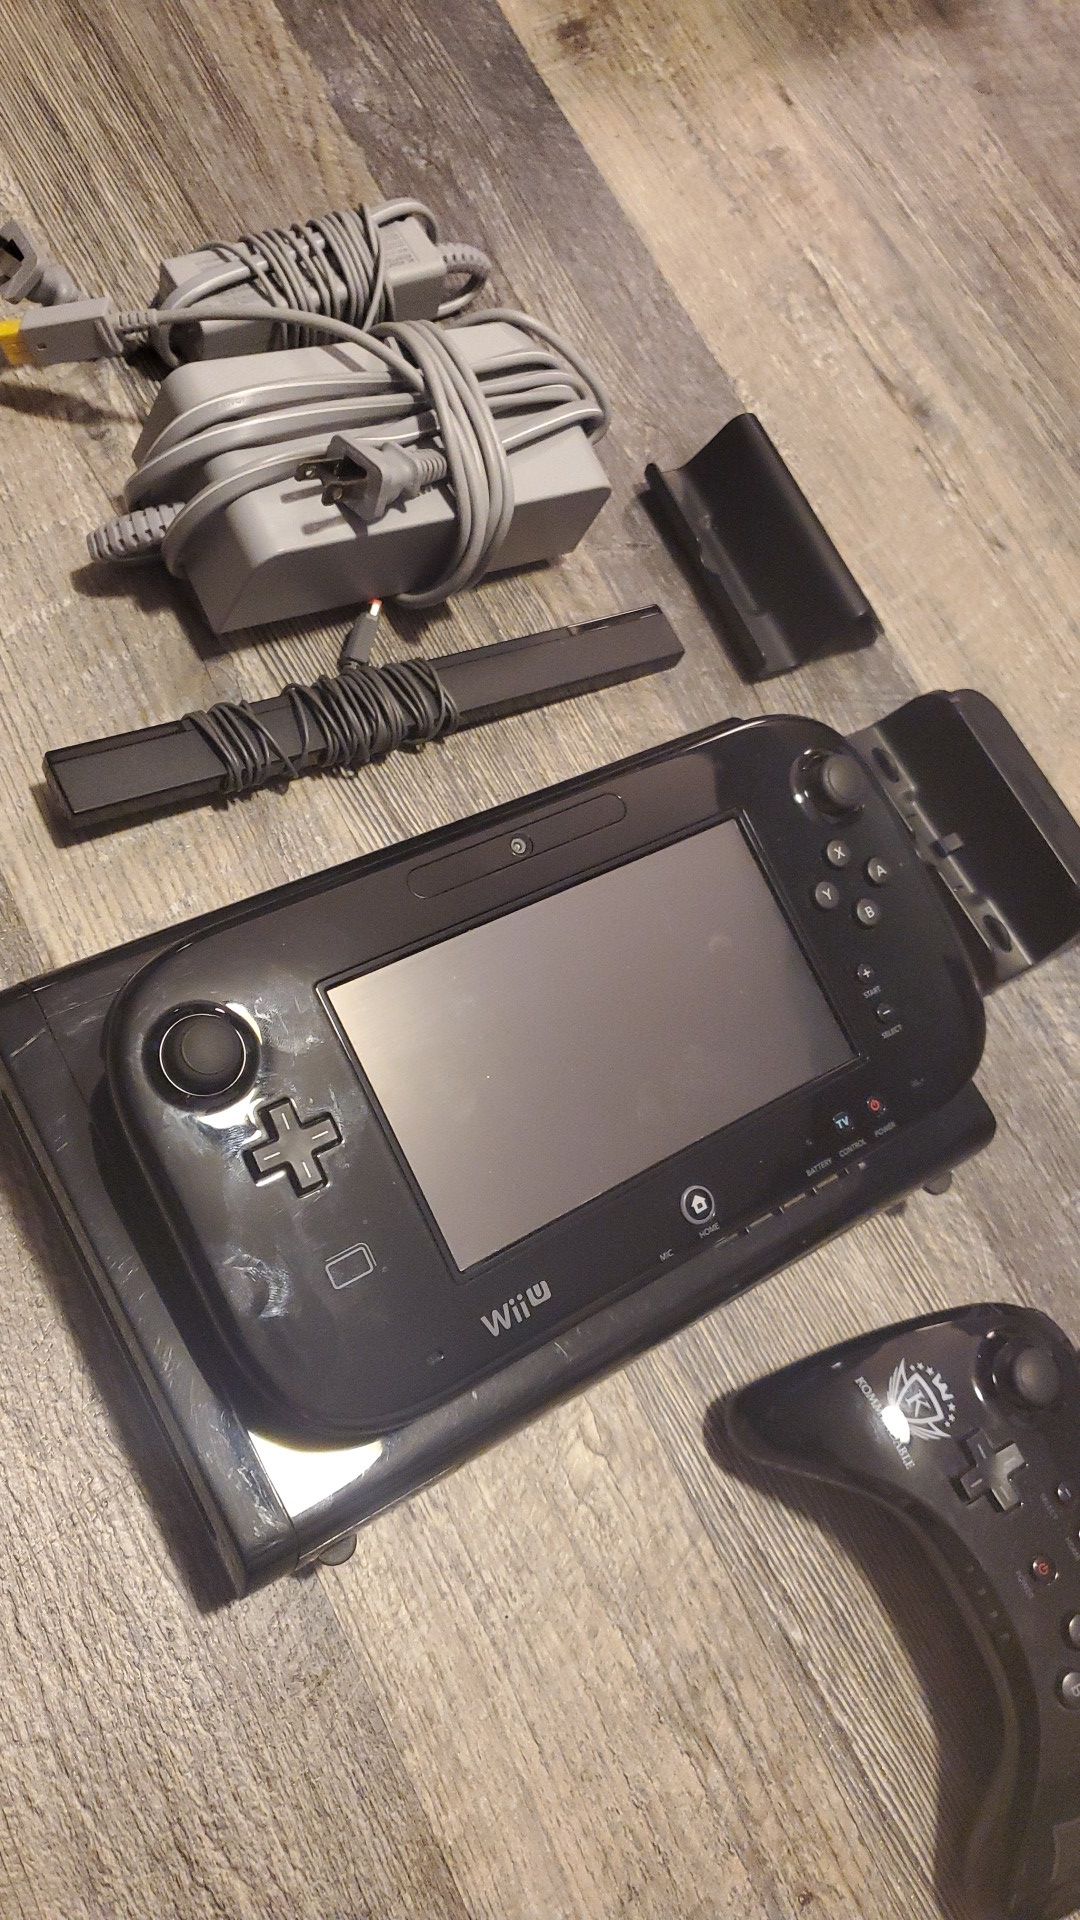 Nintendo wii u with pro style controller